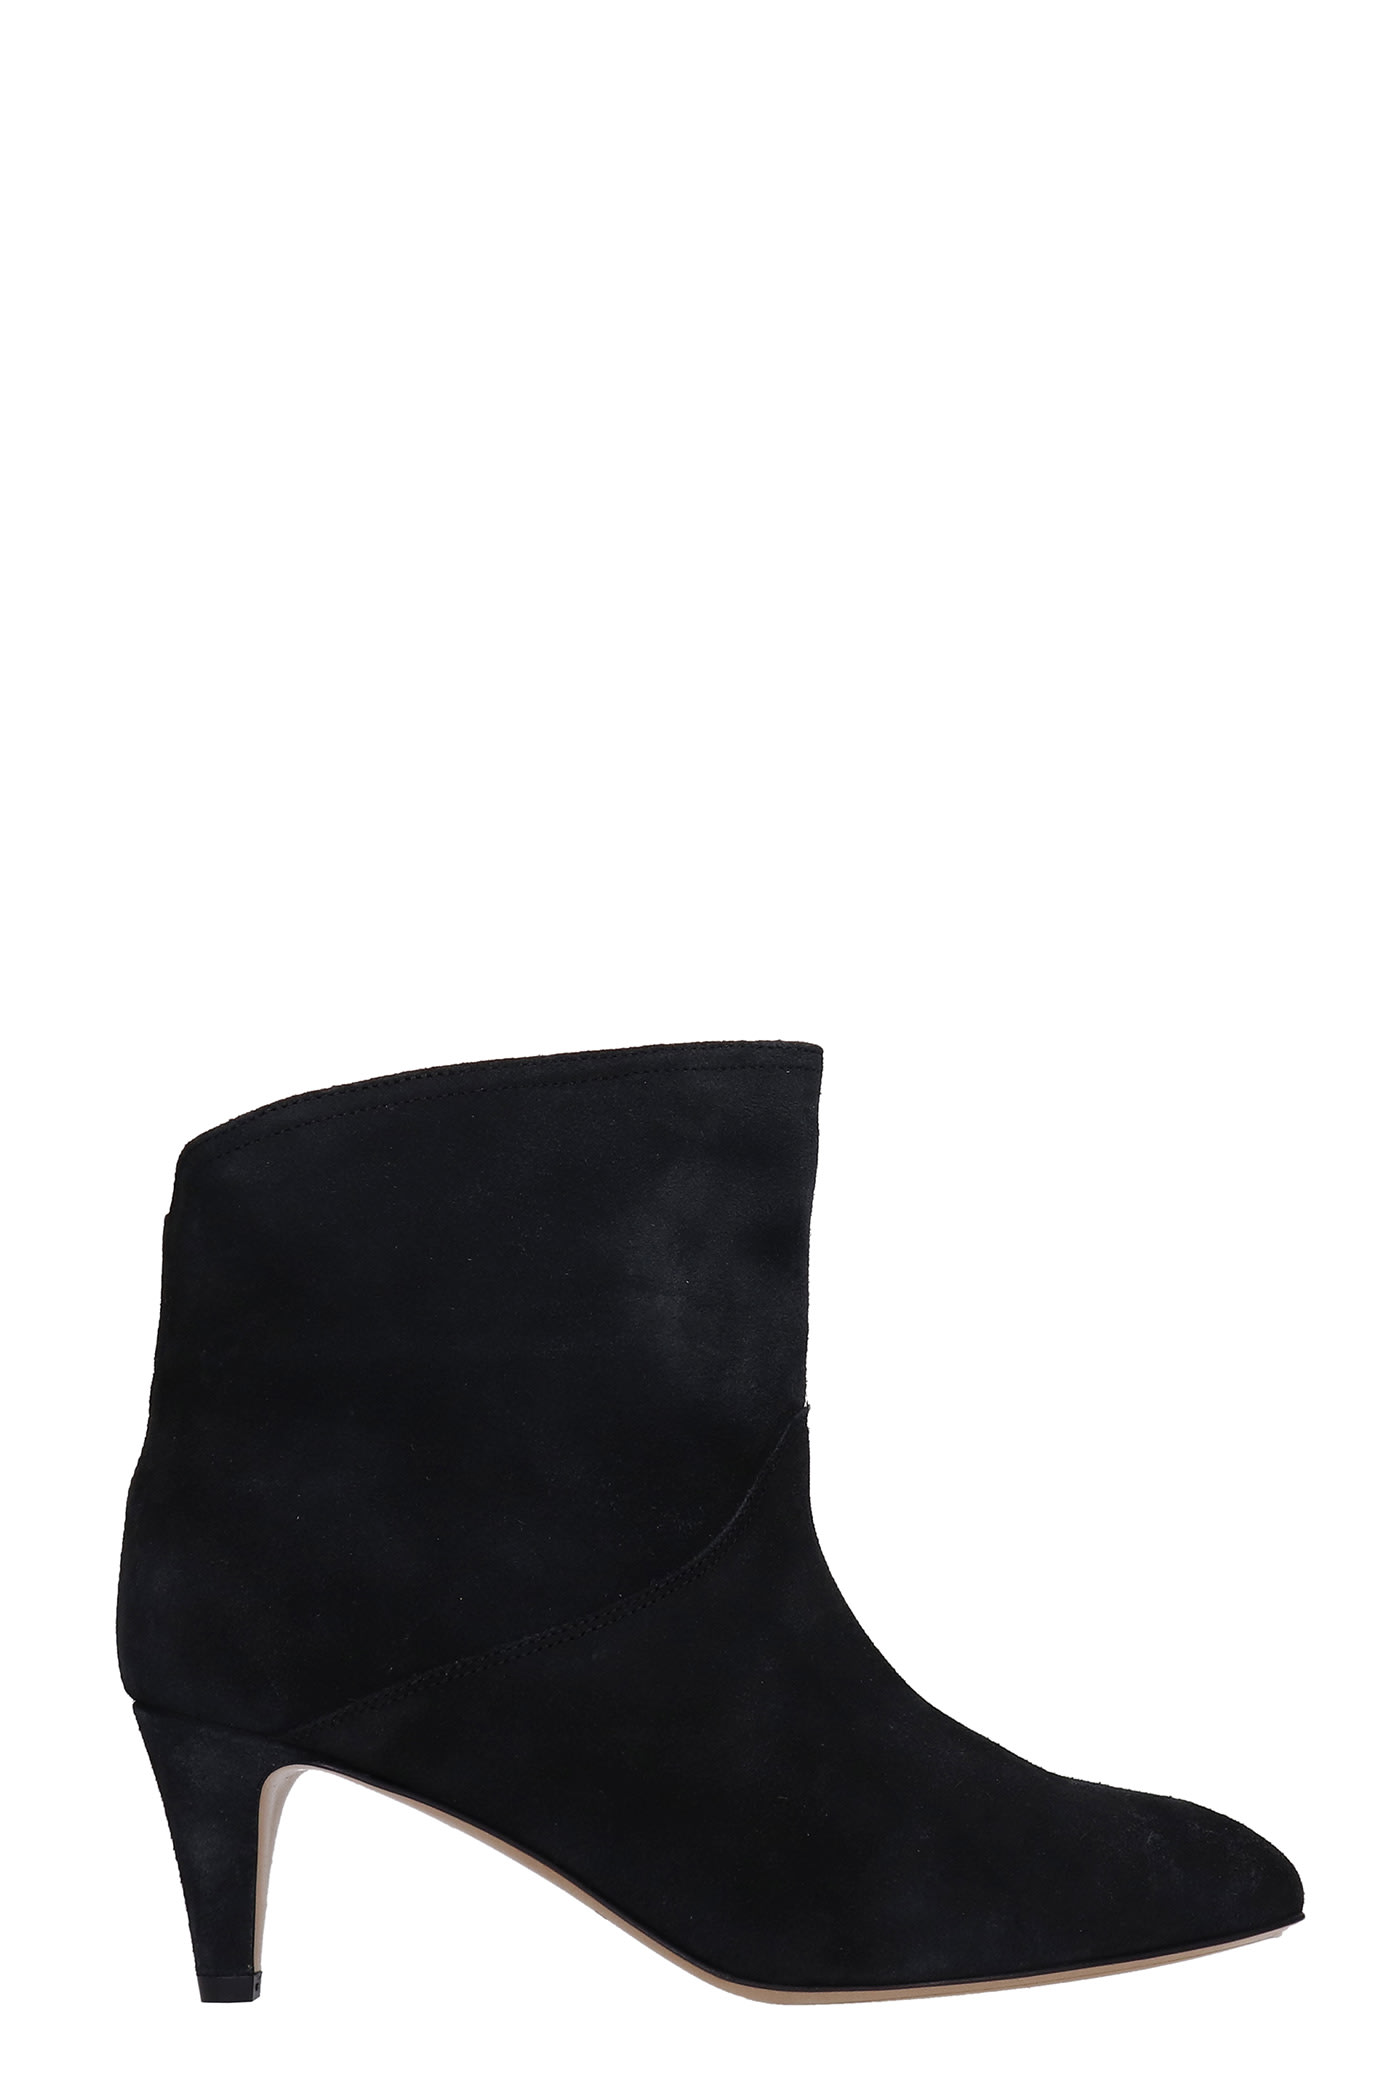 Buy Isabel Marant Defya High Heels Ankle Boots In Black Suede online, shop Isabel Marant shoes with free shipping